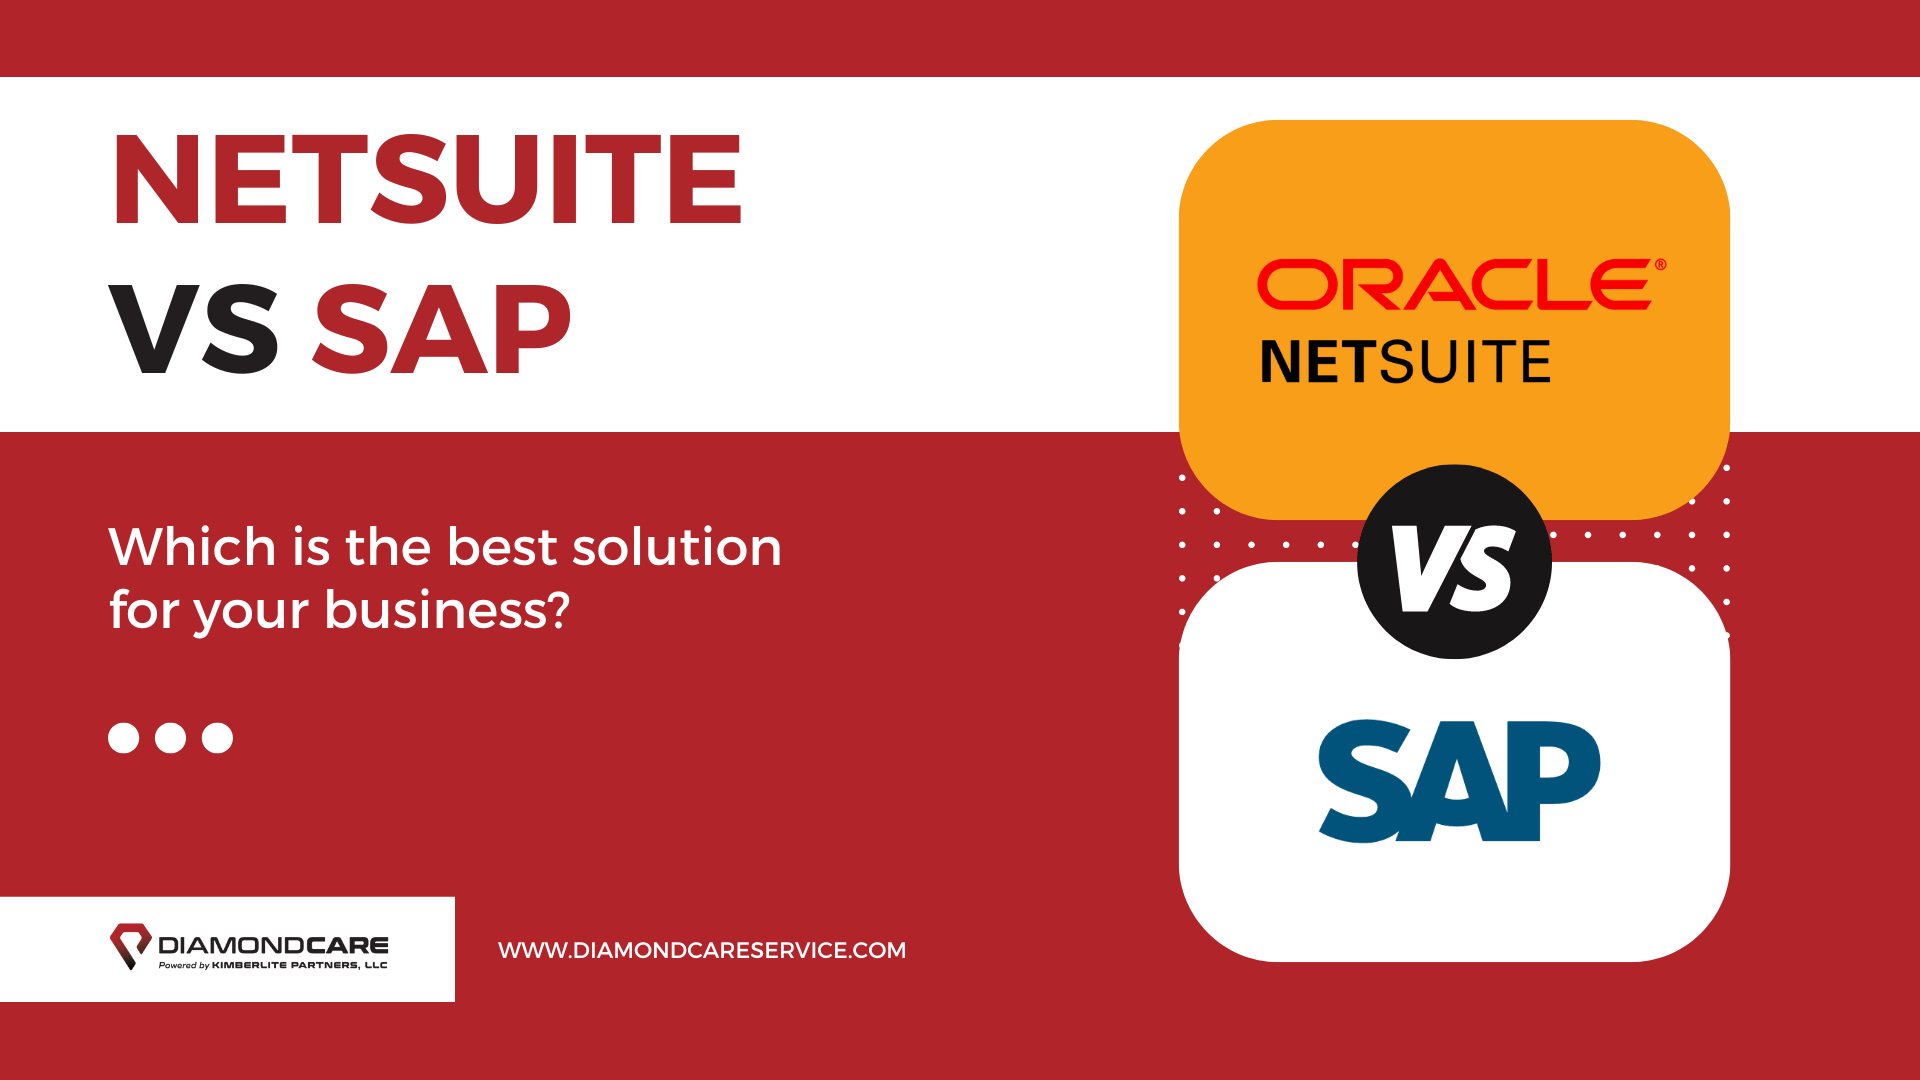 NetSuite vs SAP: Which is the best solution for your business?